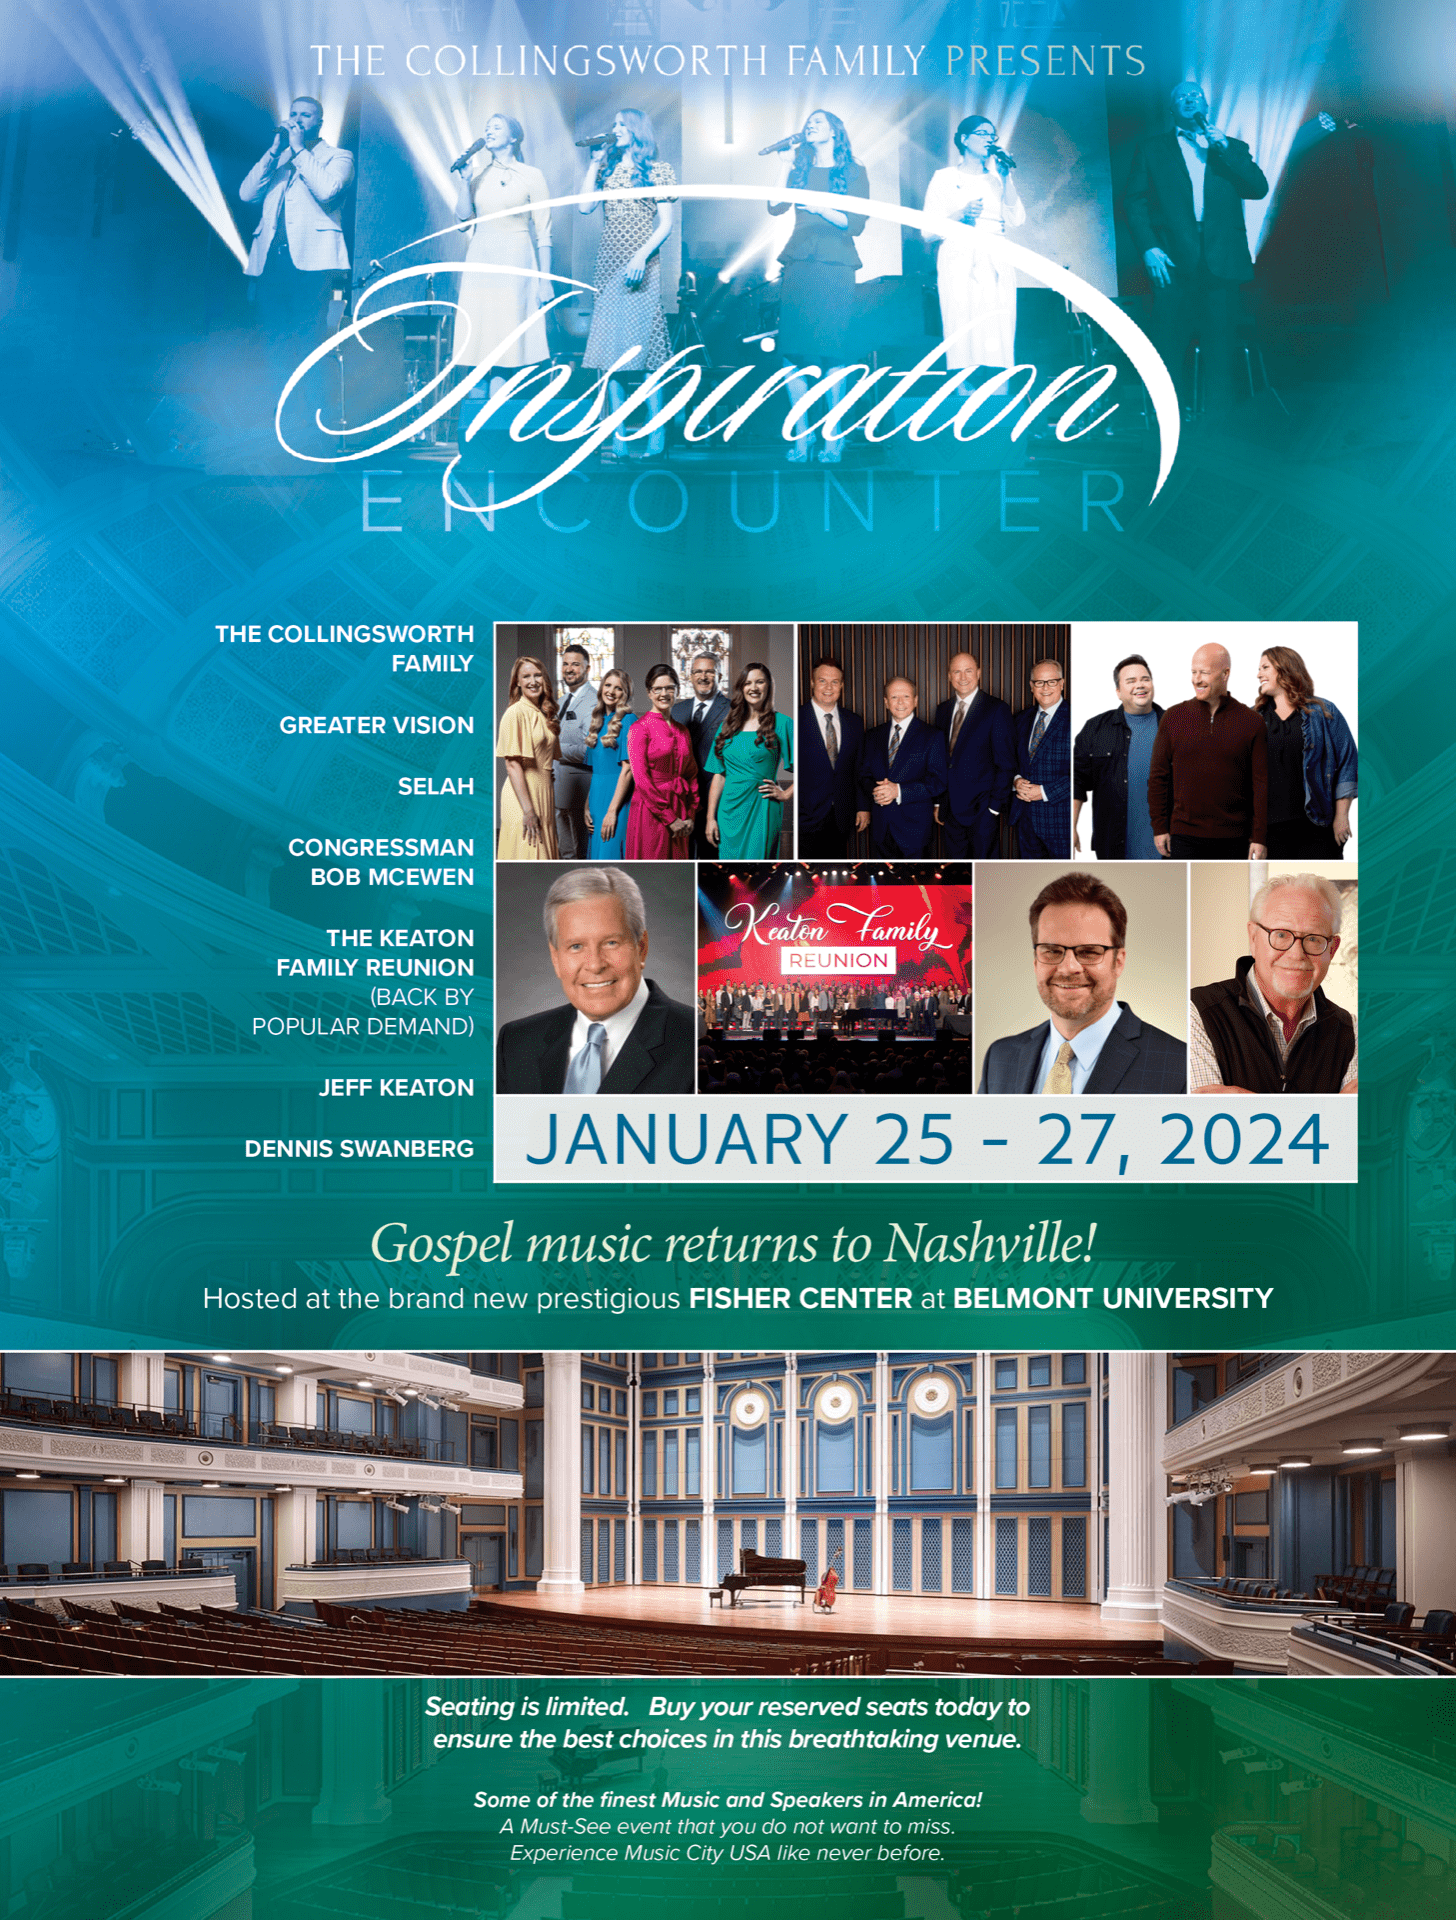 The Collingsworth Family Presents Inspiration Encounter